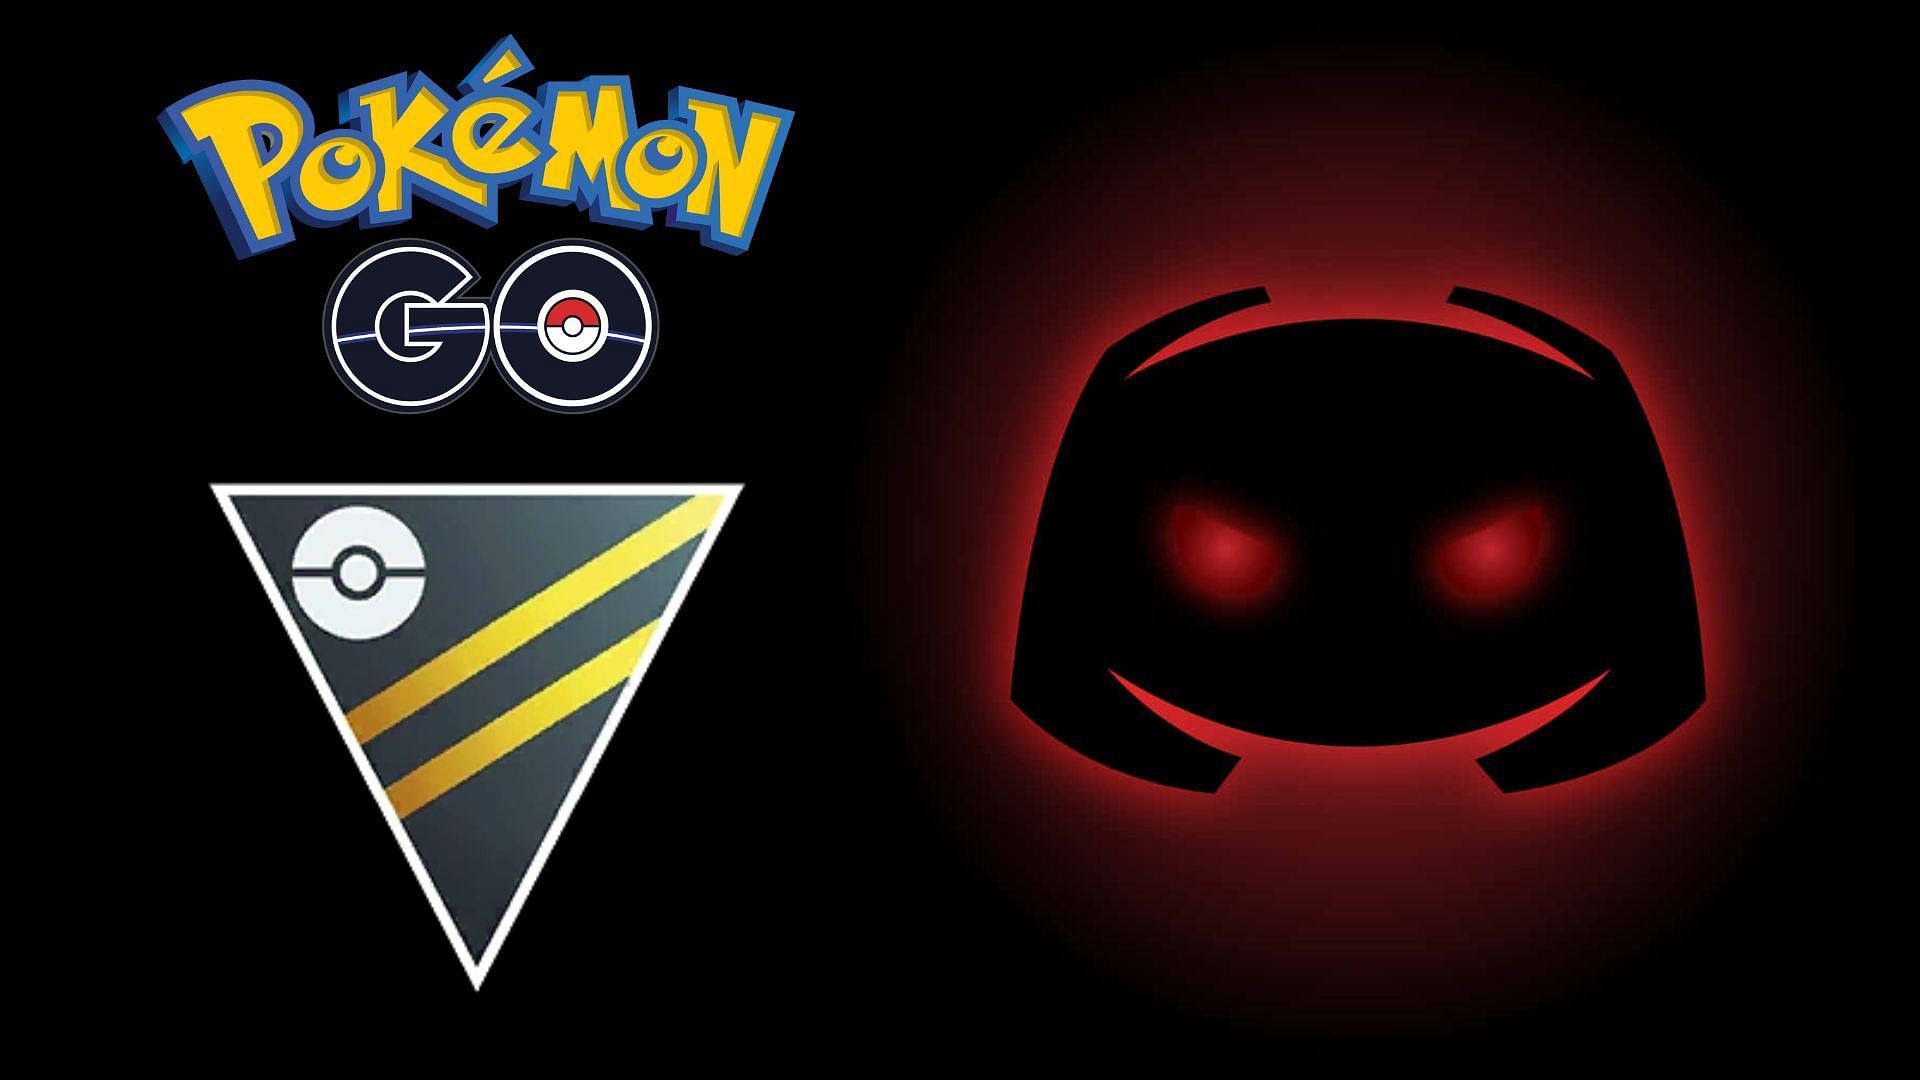 Hacking Pokemon Go to reveal characters all around you